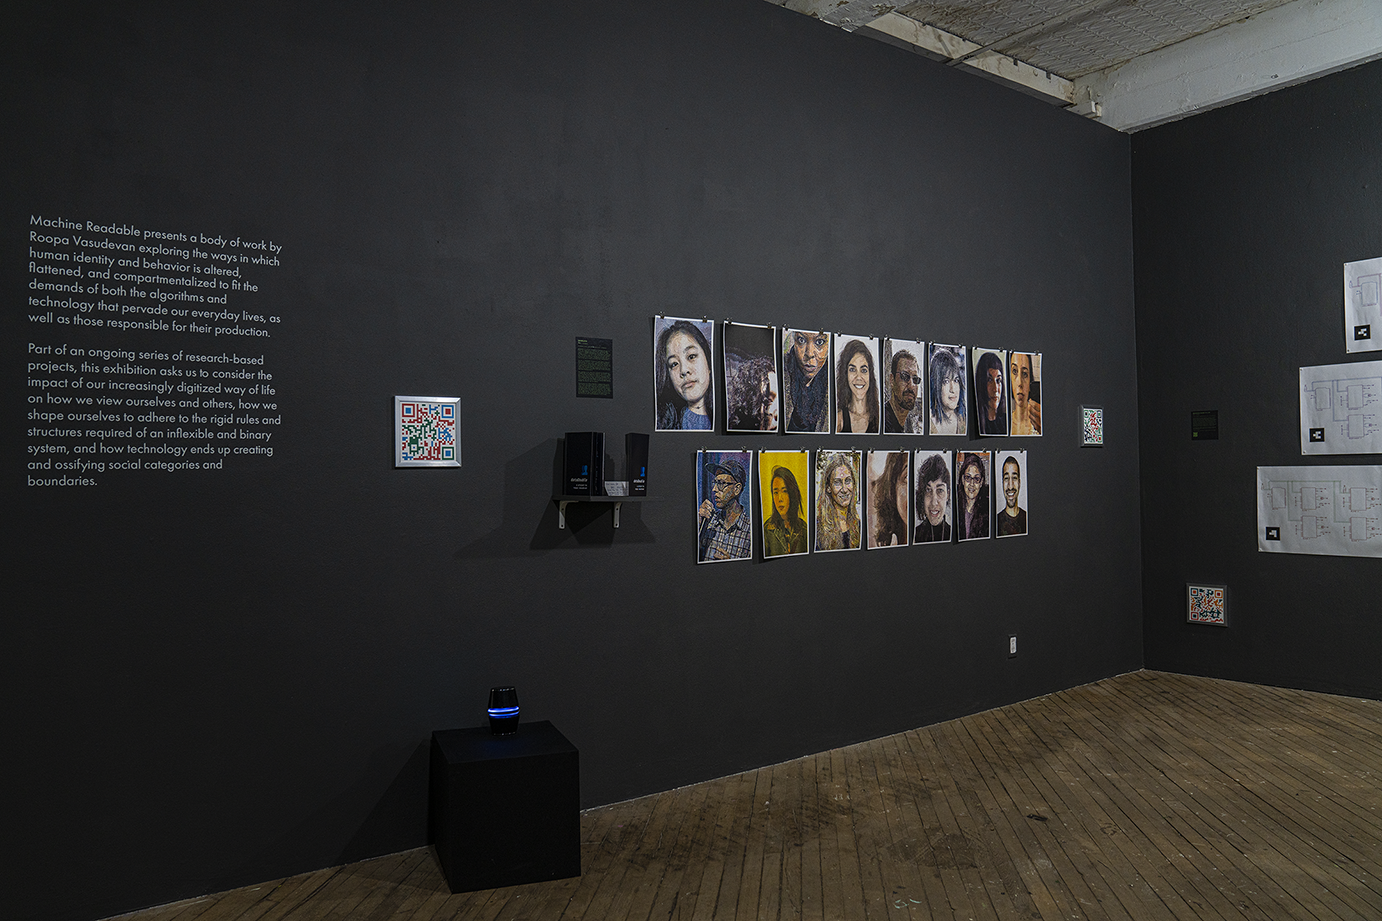 A wide view of a gallery with gray walls and wood floors. On the left side of the image there are 15 unframed prints hung up on the wall of people's portraits, and 2 small framed prints with QR codes on either side of them. On the right side is another small QR code print, hung close to the ground, and three large, unframed white systems diagrams tacked next to it.